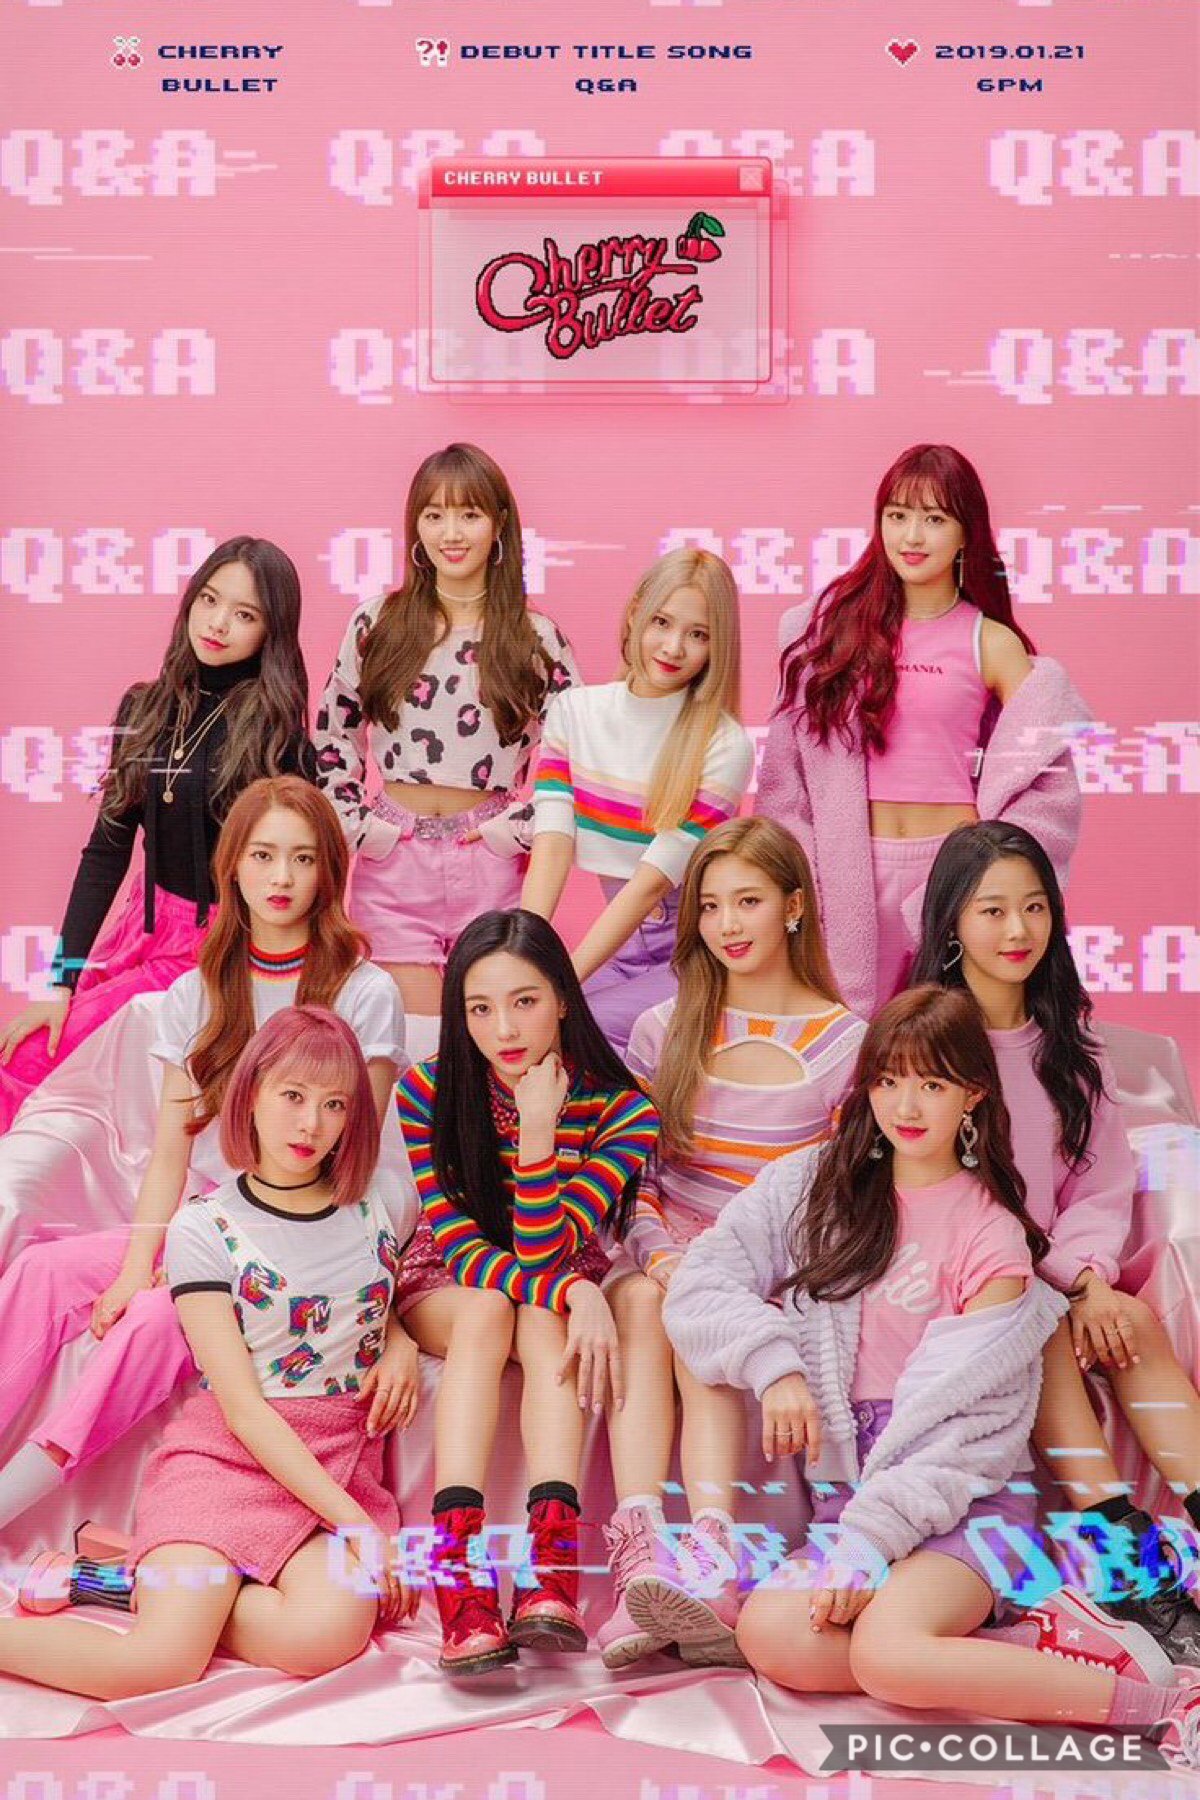 Please, go listen to Q&A by Cherry Bullet! 🍒Thank me later!